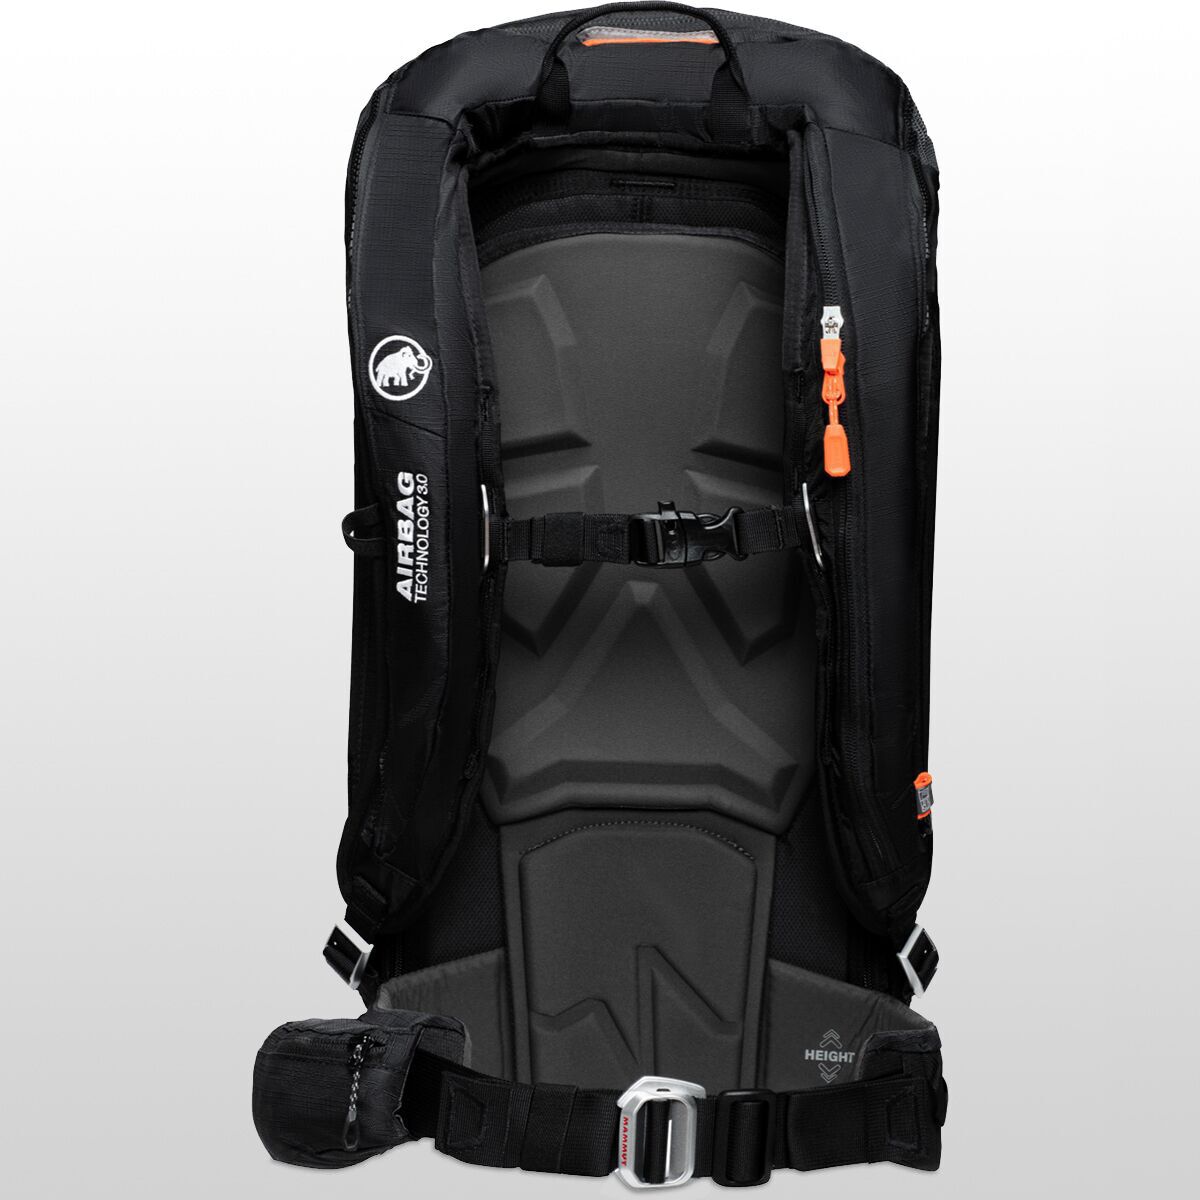 Mammut Pro Protection Airbag 3.0 Backpack - Ski